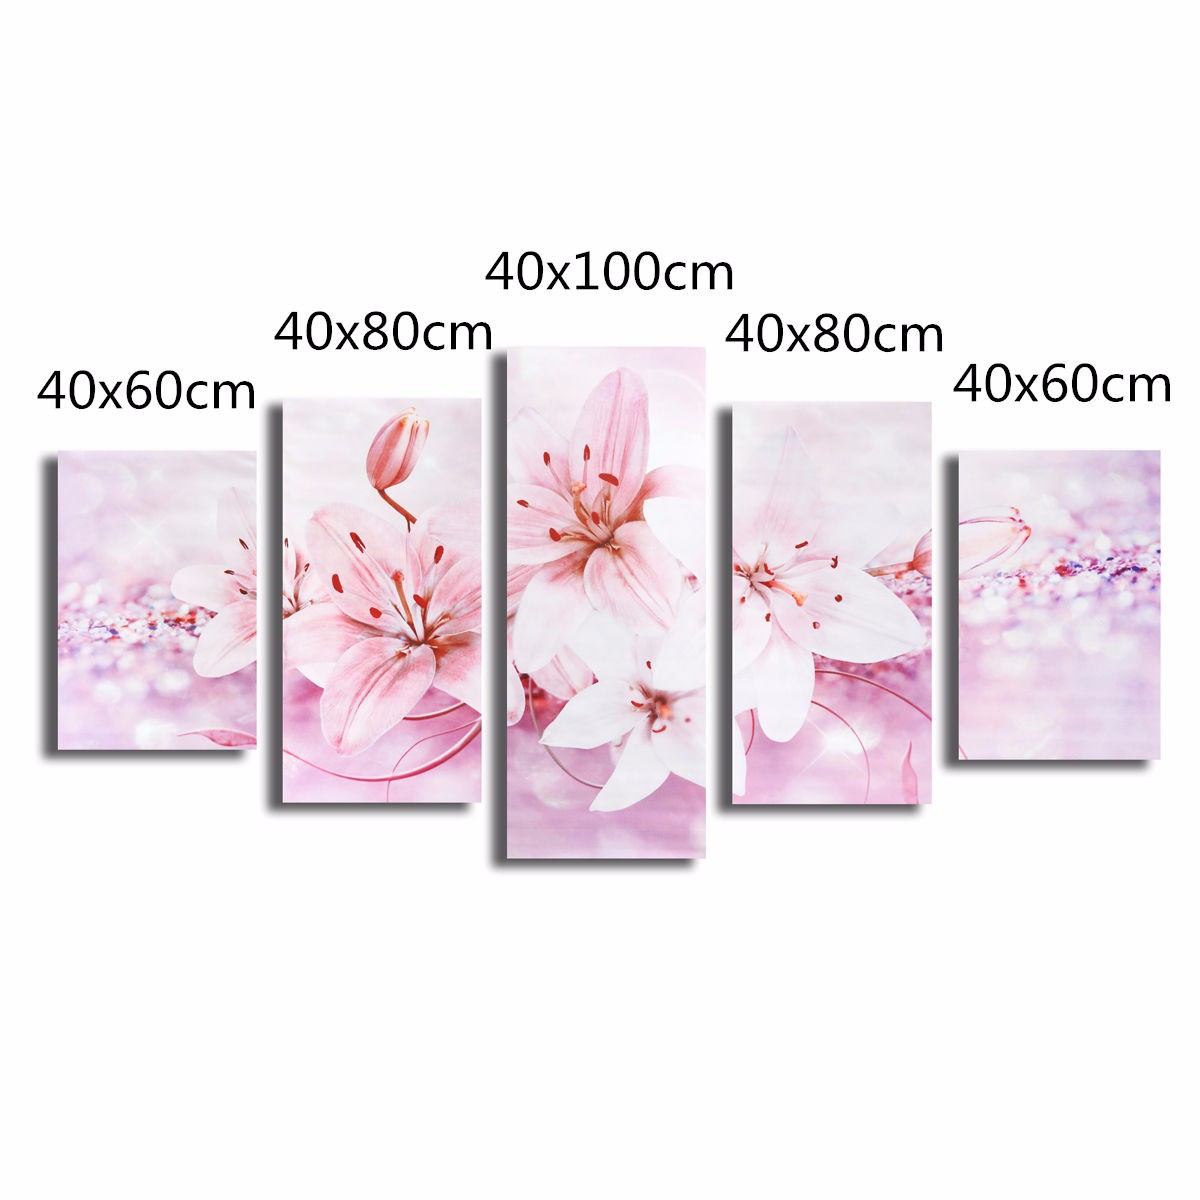 5PCS-Frameless-Canvas-Paintings-Lilies-Art-Paint-for-Home-Wall-Decoration-1080757-1